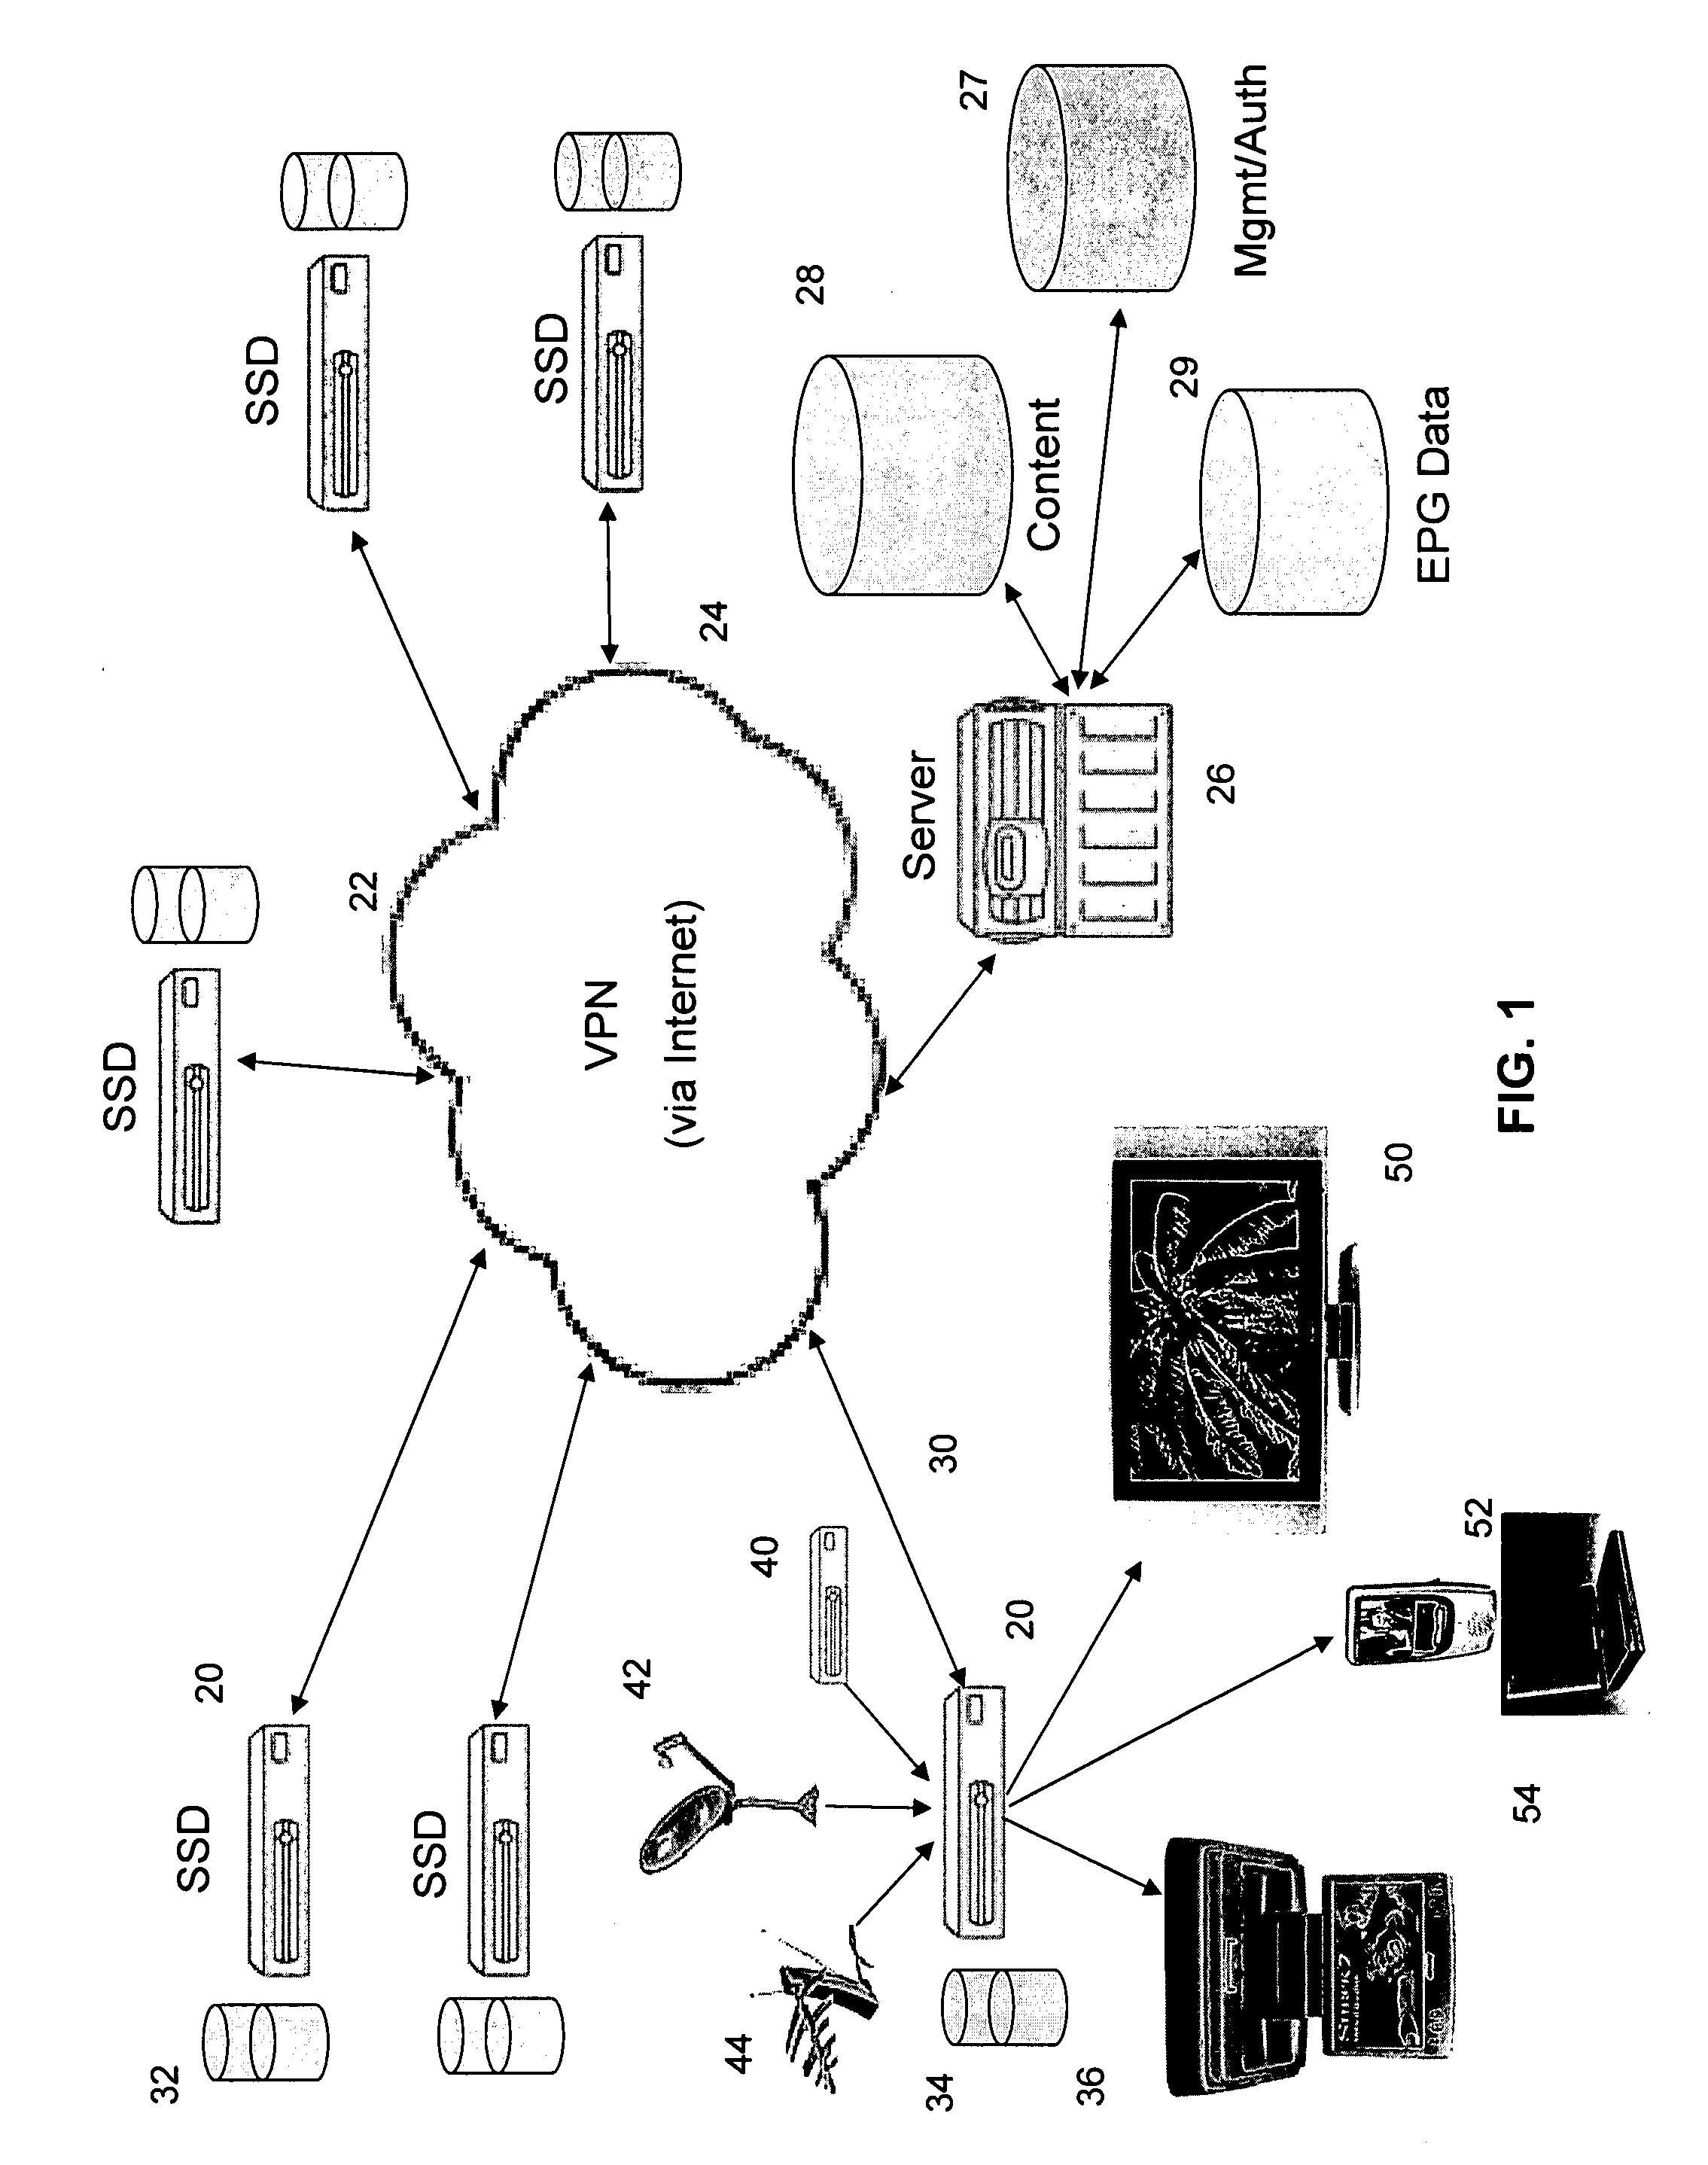 Digital content delivery via virtual private network (VPN) incorporating secured set-top devices